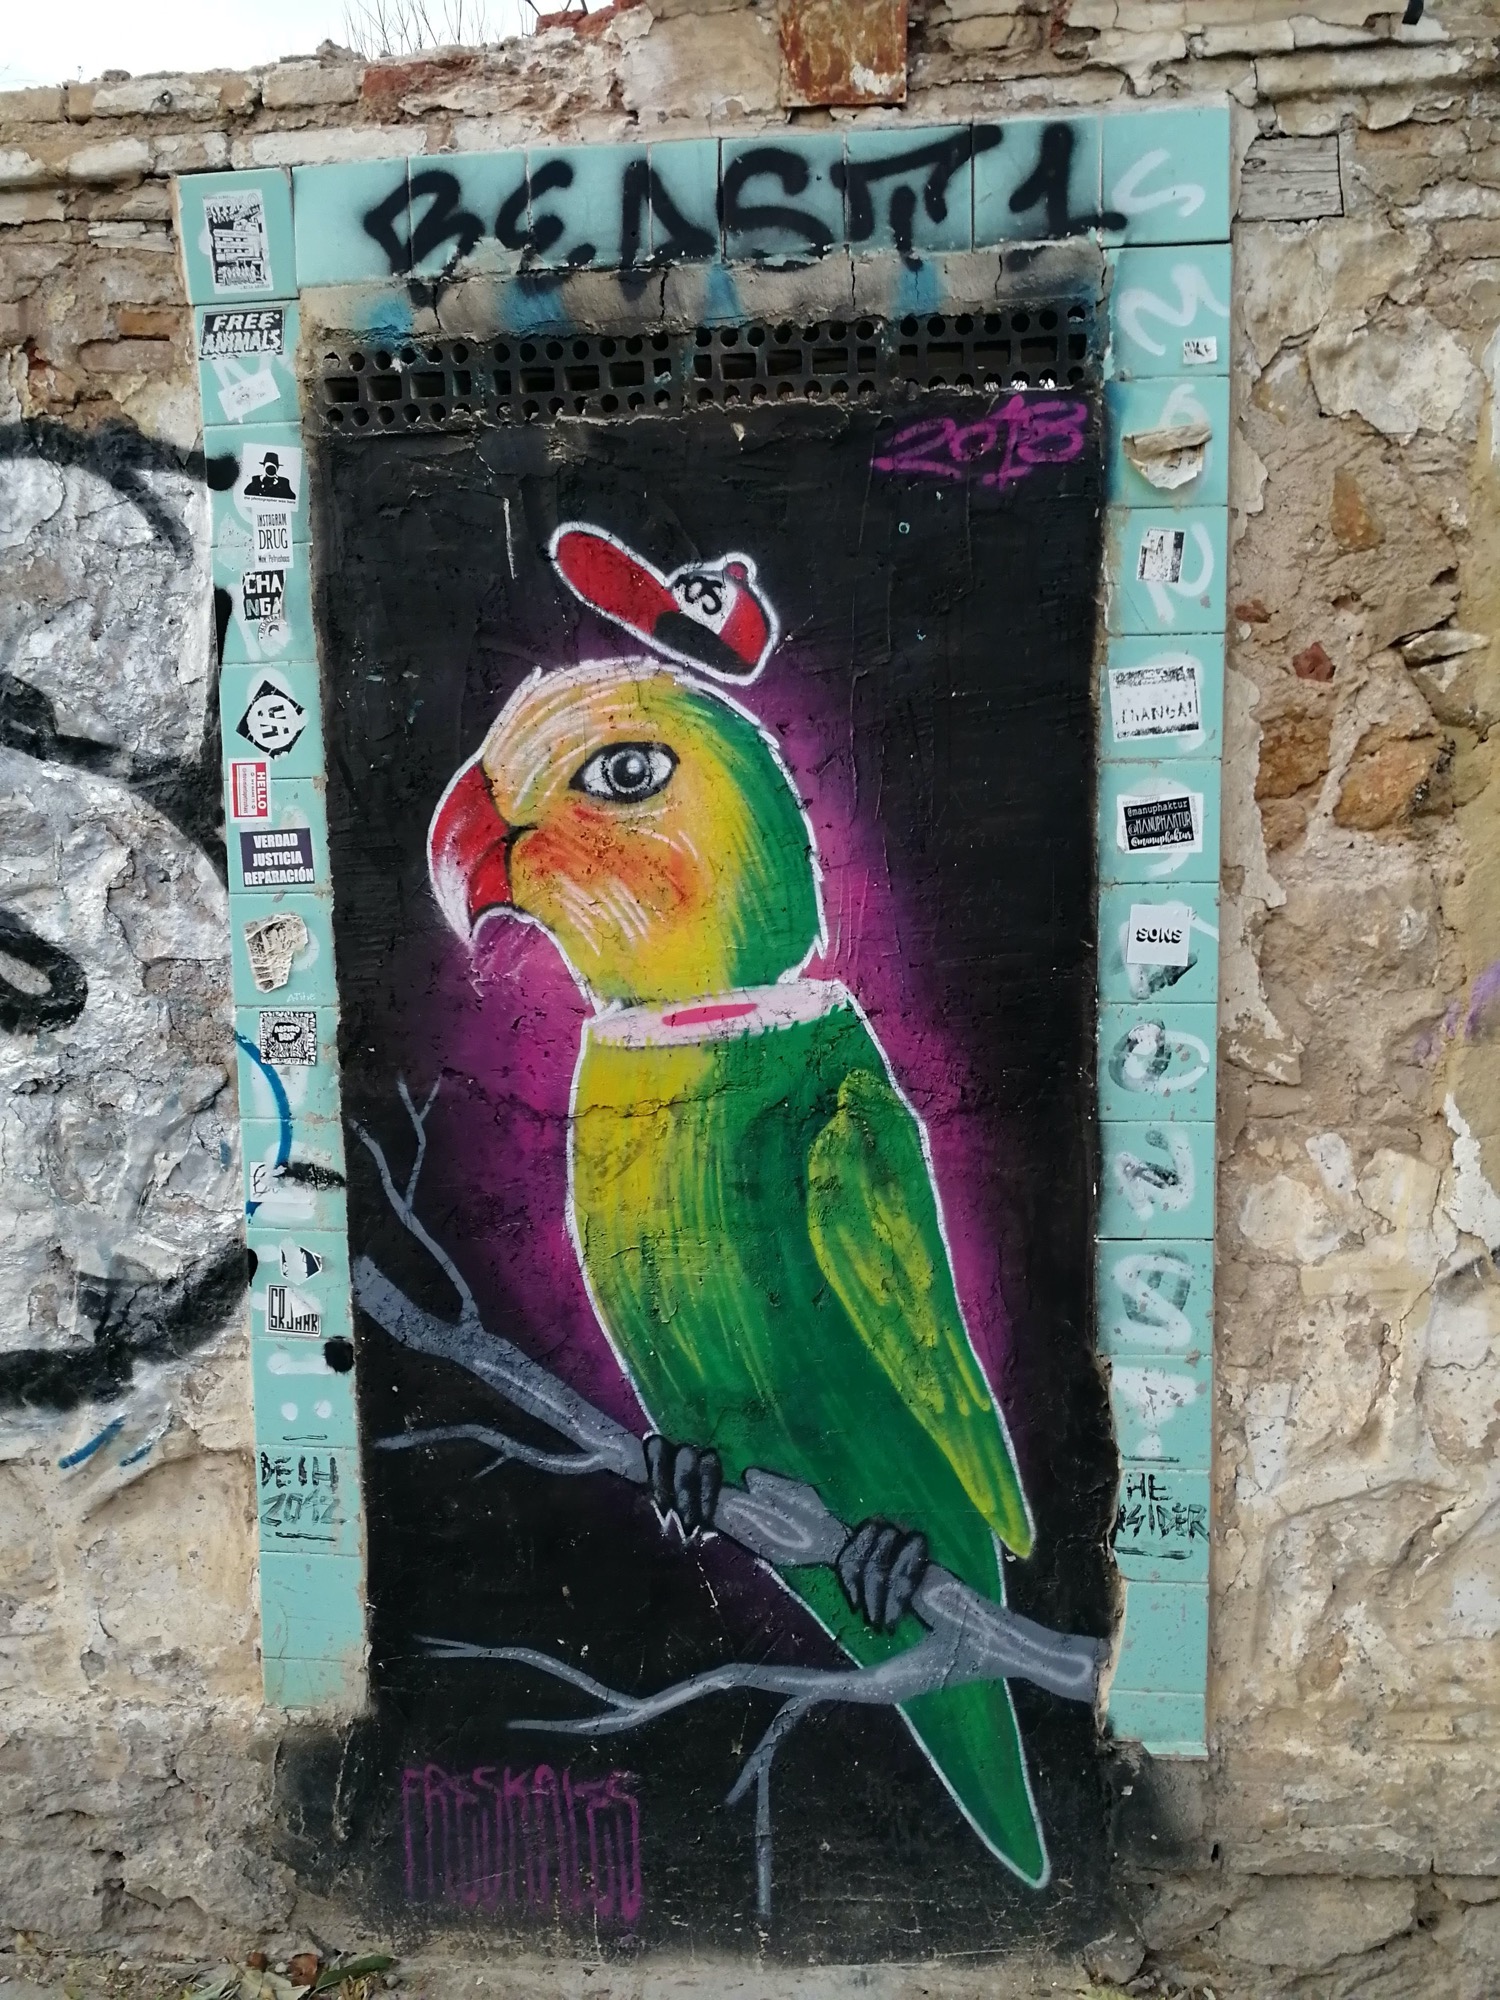 Graffiti 3505  captured by Rabot in València Spain